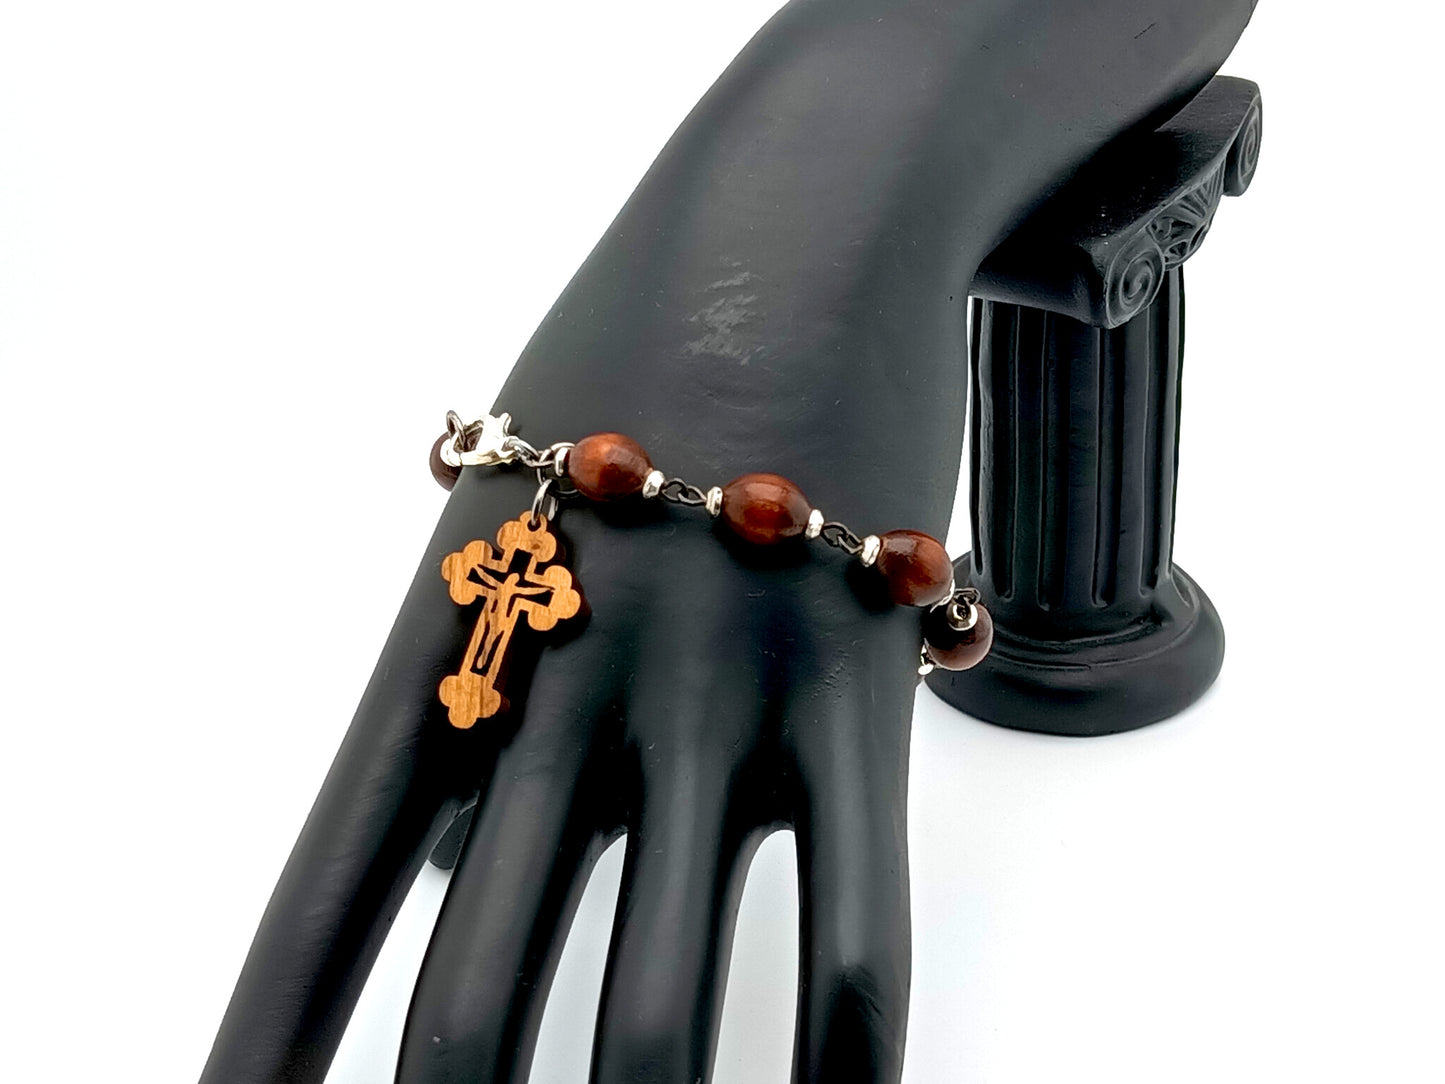 Jerusalem crucifix unique rosary beads single decade rosary bracelet with dark wood beads, olive wood crucifix and silver clasp.